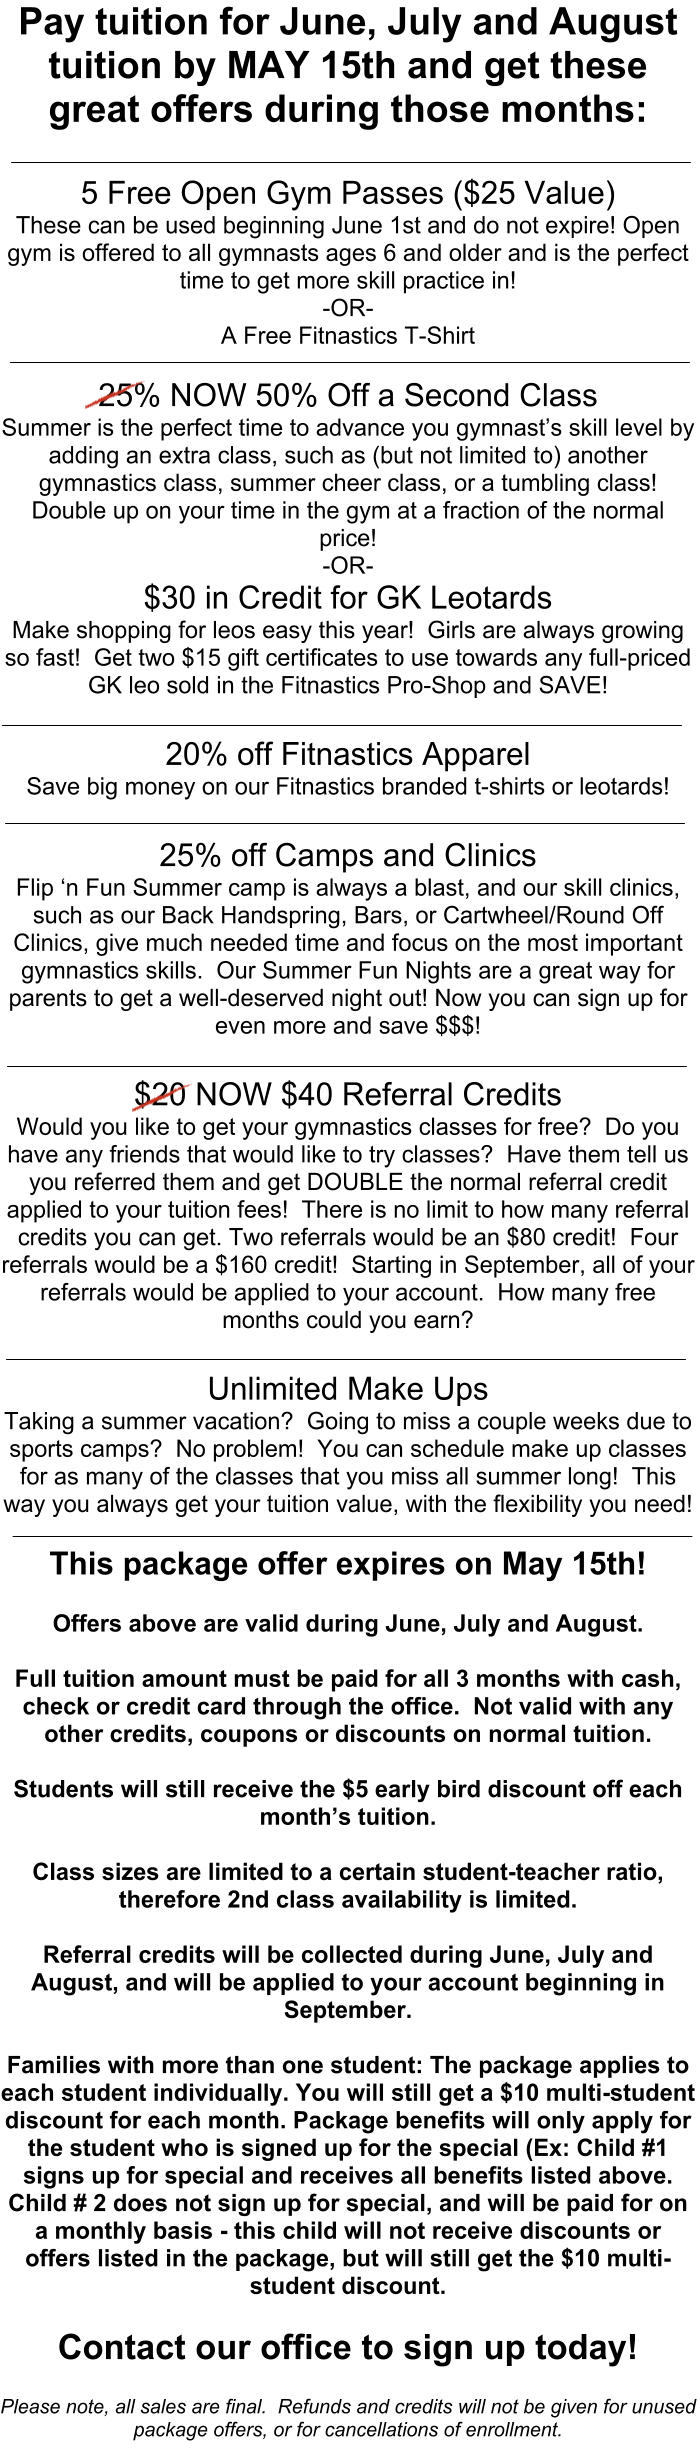 Pay tuition for June, July and August tuition by MAY 15th and get these great offers during those months:   5 Free Open Gym Passes ($25 Value) These can be used beginning June 1st and do not expire! Open gym is offered to all gymnasts ages 6 and older and is the perfect time to get more skill practice in! -OR- A Free Fitnastics T-Shirt  25% NOW 50% Off a Second Class Summer is the perfect time to advance you gymnasts skill level by adding an extra class, such as (but not limited to) another gymnastics class, summer cheer class, or a tumbling class!  Double up on your time in the gym at a fraction of the normal price! -OR- $30 in Credit for GK Leotards Make shopping for leos easy this year!  Girls are always growing so fast!  Get two $15 gift certificates to use towards any full-priced GK leo sold in the Fitnastics Pro-Shop and SAVE!  20% off Fitnastics Apparel  Save big money on our Fitnastics branded t-shirts or leotards!    25% off Camps and Clinics  Flip n Fun Summer camp is always a blast, and our skill clinics, such as our Back Handspring, Bars, or Cartwheel/Round Off Clinics, give much needed time and focus on the most important gymnastics skills.  Our Summer Fun Nights are a great way for parents to get a well-deserved night out! Now you can sign up for even more and save $$$!  $20 NOW $40 Referral Credits  Would you like to get your gymnastics classes for free?  Do you have any friends that would like to try classes?  Have them tell us you referred them and get DOUBLE the normal referral credit applied to your tuition fees!  There is no limit to how many referral credits you can get. Two referrals would be an $80 credit!  Four referrals would be a $160 credit!  Starting in September, all of your referrals would be applied to your account.  How many free months could you earn?  Unlimited Make Ups Taking a summer vacation?  Going to miss a couple weeks due to sports camps?  No problem!  You can schedule make up classes for as many of the classes that you miss all summer long!  This way you always get your tuition value, with the flexibility you need!  This package offer expires on May 15th!  Offers above are valid during June, July and August.  Full tuition amount must be paid for all 3 months with cash, check or credit card through the office.  Not valid with any other credits, coupons or discounts on normal tuition.    Students will still receive the $5 early bird discount off each months tuition.   Class sizes are limited to a certain student-teacher ratio, therefore 2nd class availability is limited.  Referral credits will be collected during June, July and August, and will be applied to your account beginning in September.  Families with more than one student: The package applies to each student individually. You will still get a $10 multi-student discount for each month. Package benefits will only apply for the student who is signed up for the special (Ex: Child #1 signs up for special and receives all benefits listed above.  Child # 2 does not sign up for special, and will be paid for on a monthly basis - this child will not receive discounts or offers listed in the package, but will still get the $10 multi-student discount.  Contact our office to sign up today!  Please note, all sales are final.  Refunds and credits will not be given for unused package offers, or for cancellations of enrollment.